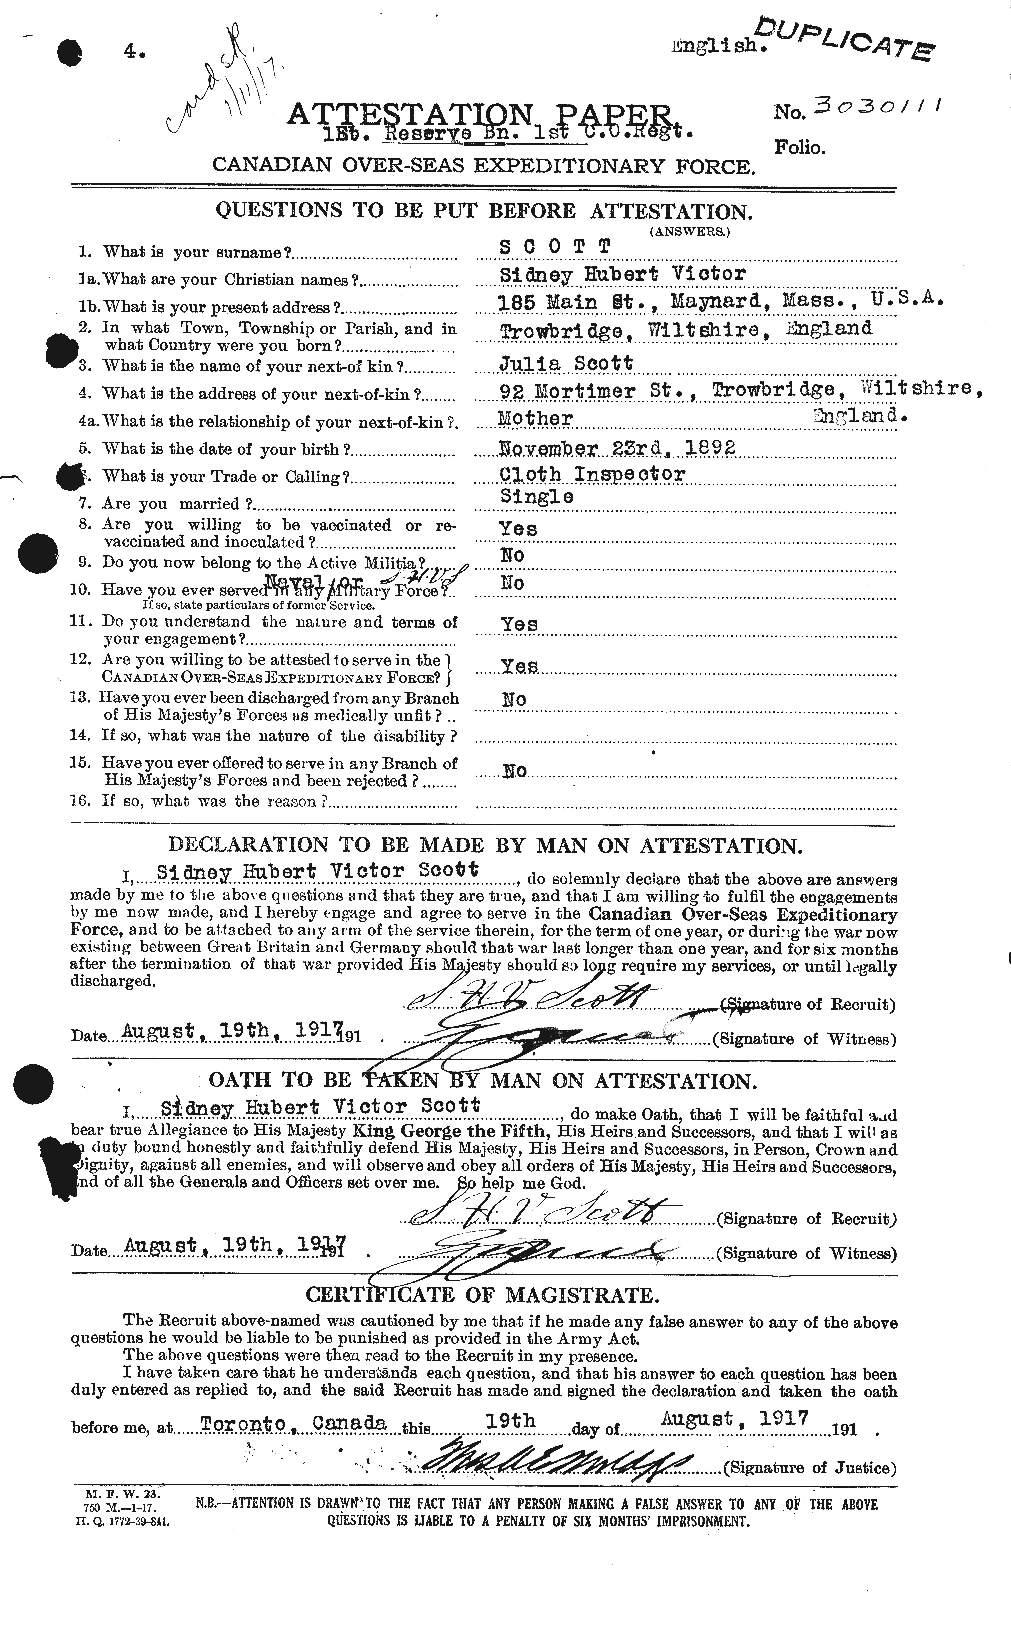 Personnel Records of the First World War - CEF 088846a